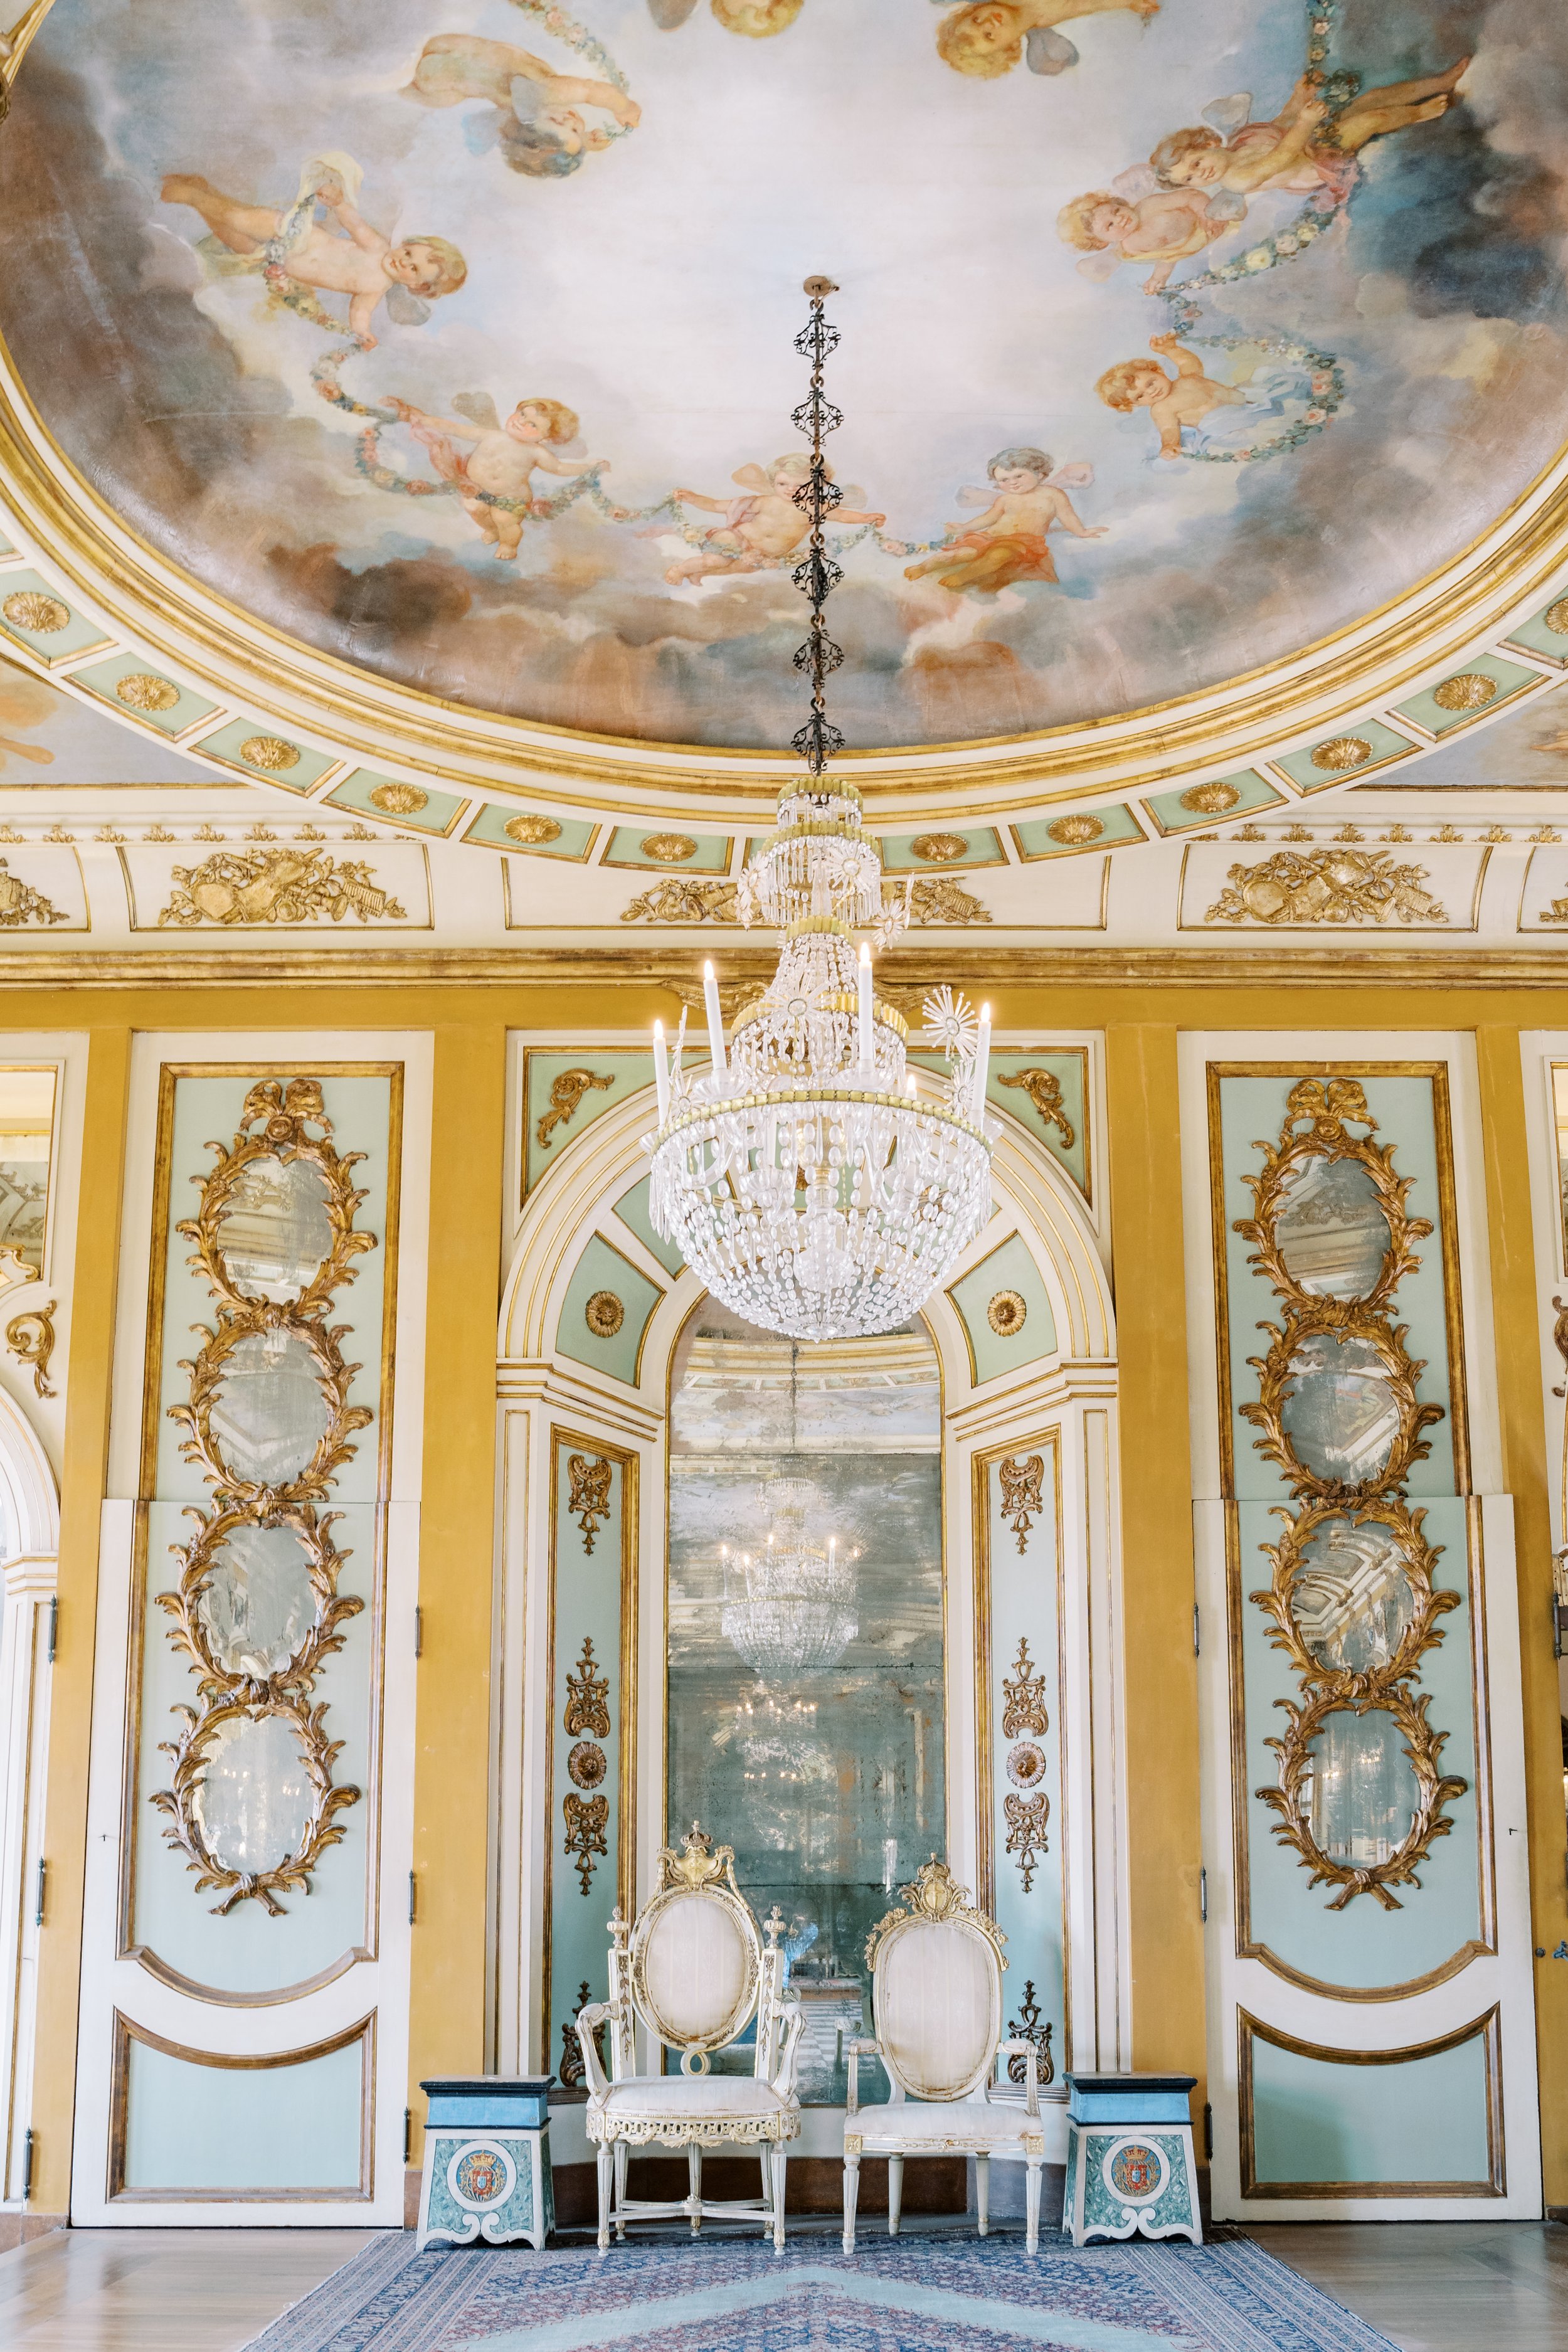 The interior of Palácio de Queluz showing an impressive chandelier, a mirror in the middle, with two chairs on the both sides and a beautiful painting on the ceiling